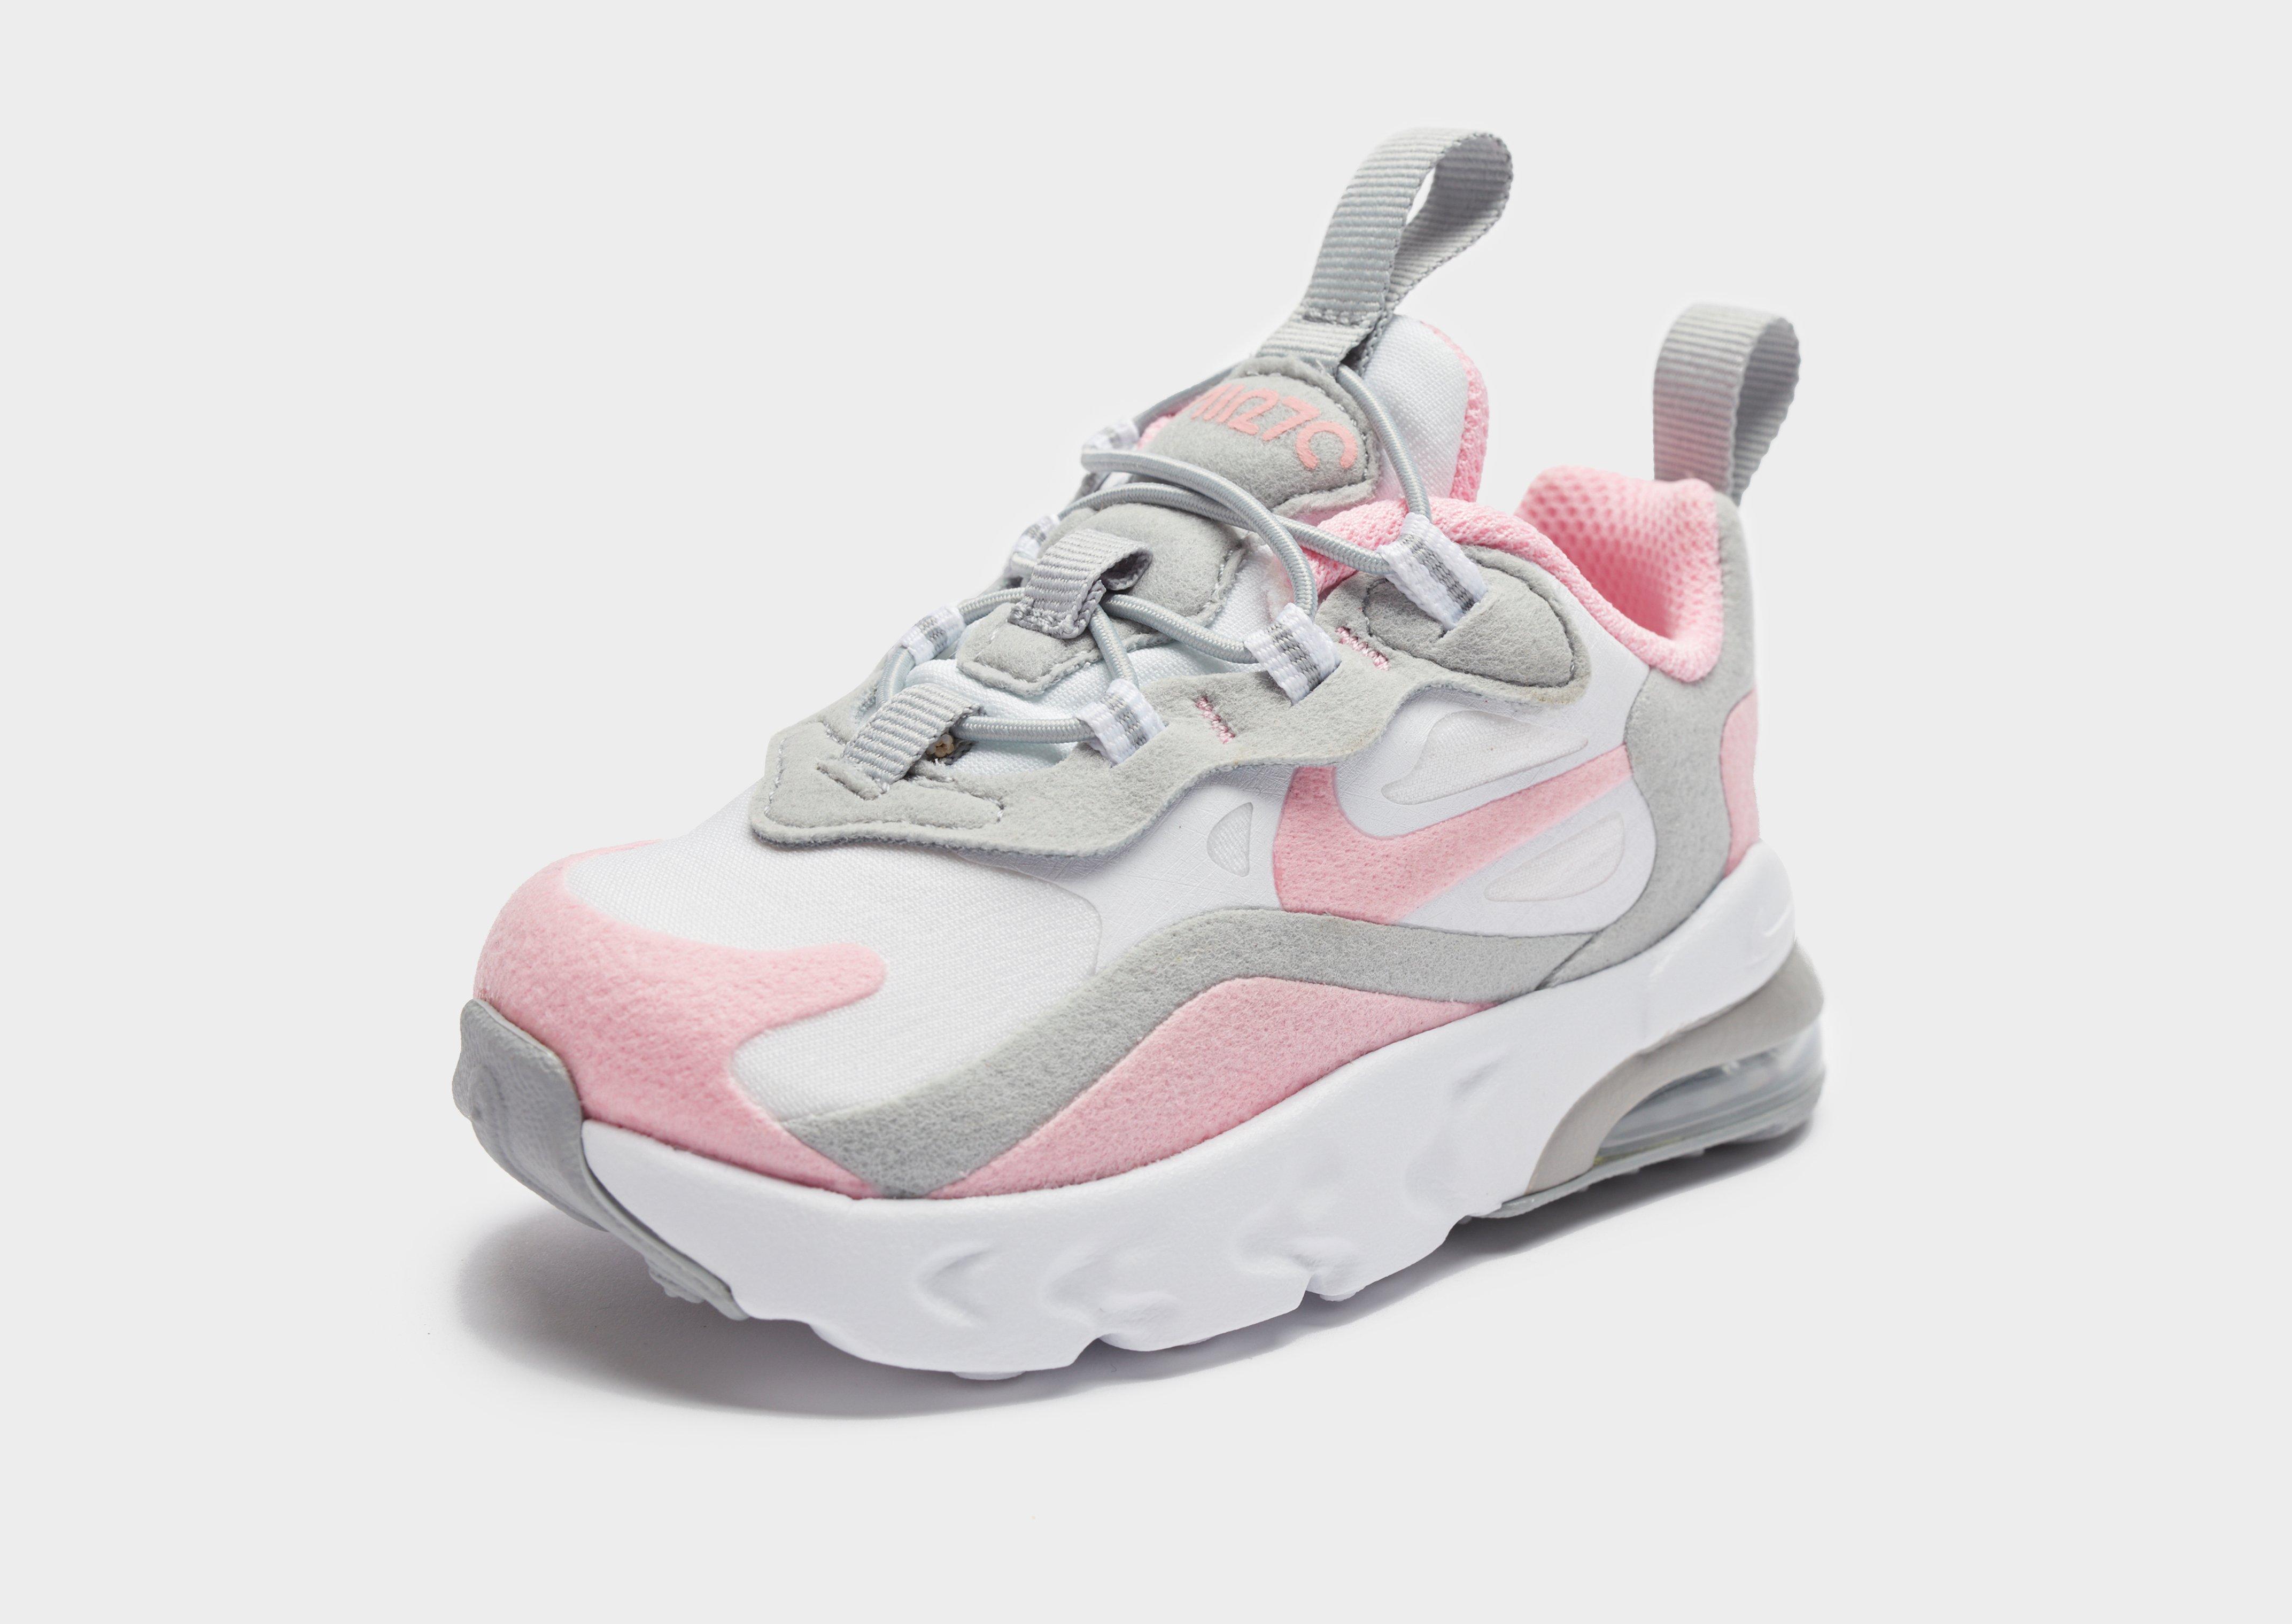 nike react infant trainers